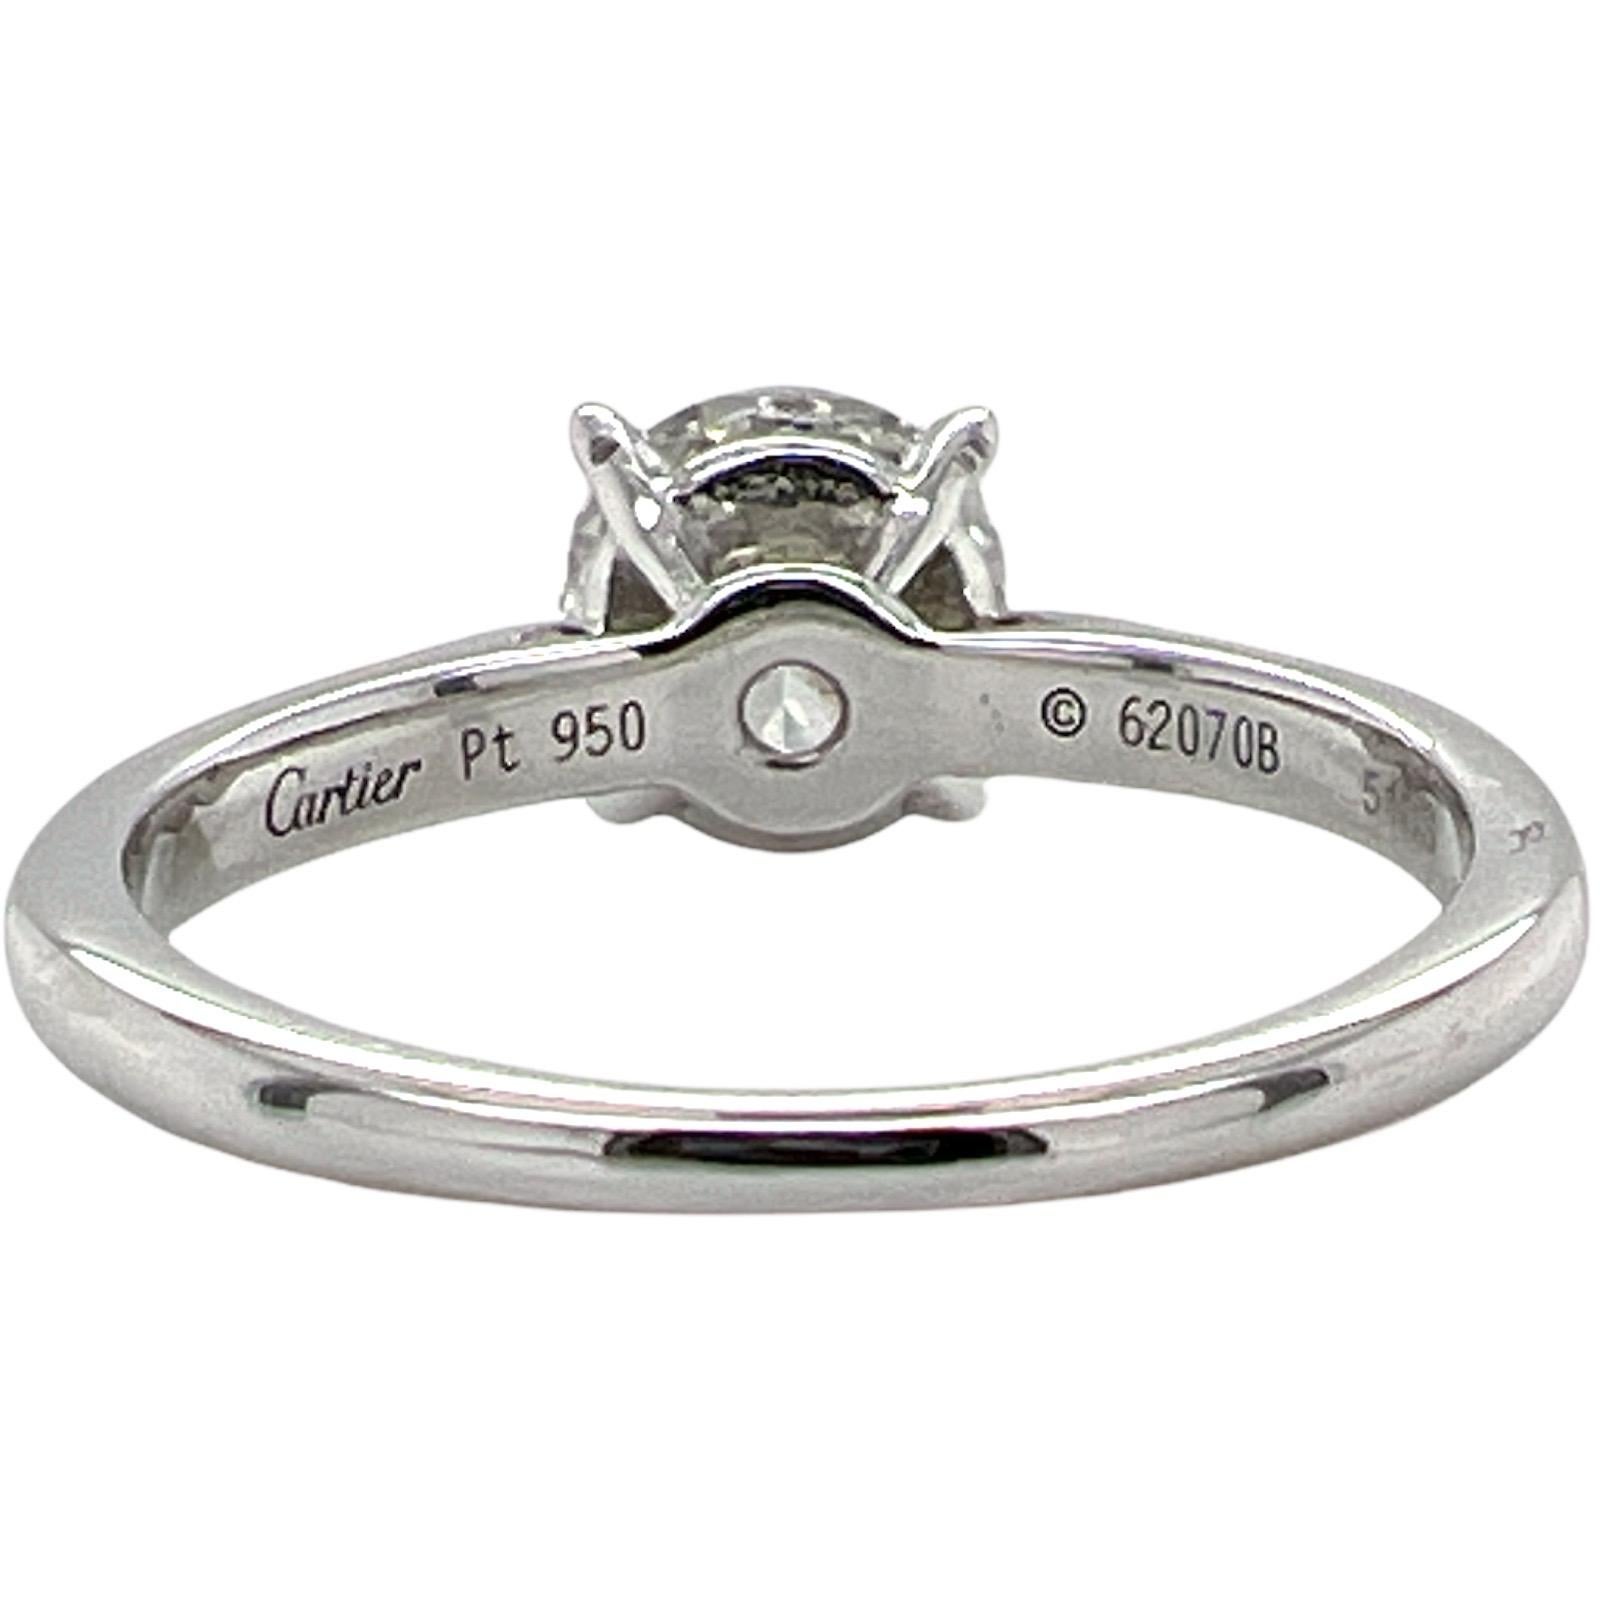 Round Cut Cartier 1895 Solitaire Diamond Platinum Engagement Ring 1.24 Ct GIA Certified